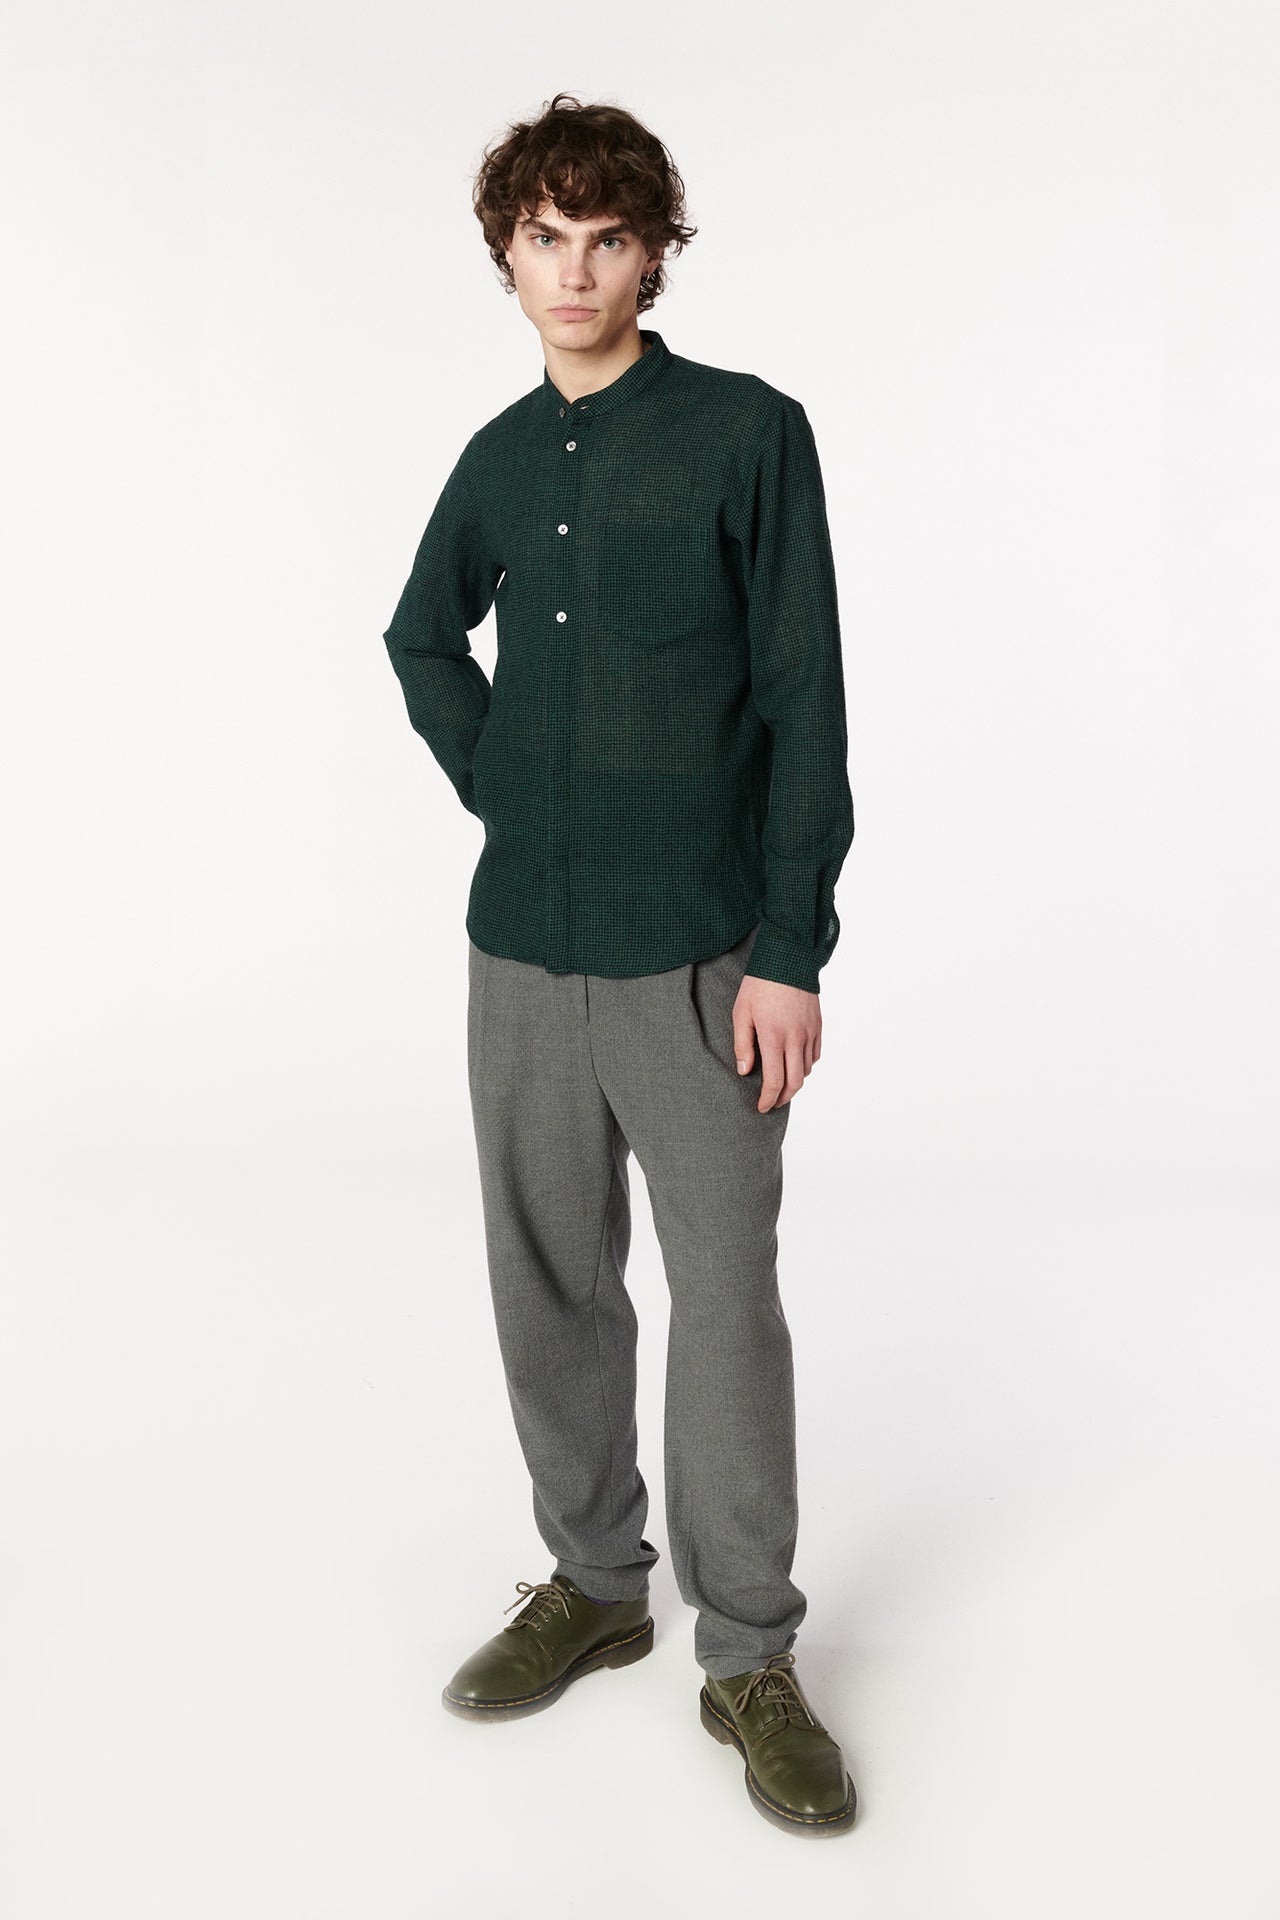 Zen Grandad Collar Shirt in the Japanese Pure Virgin Wool with Green and Black Houndstooth Pattern